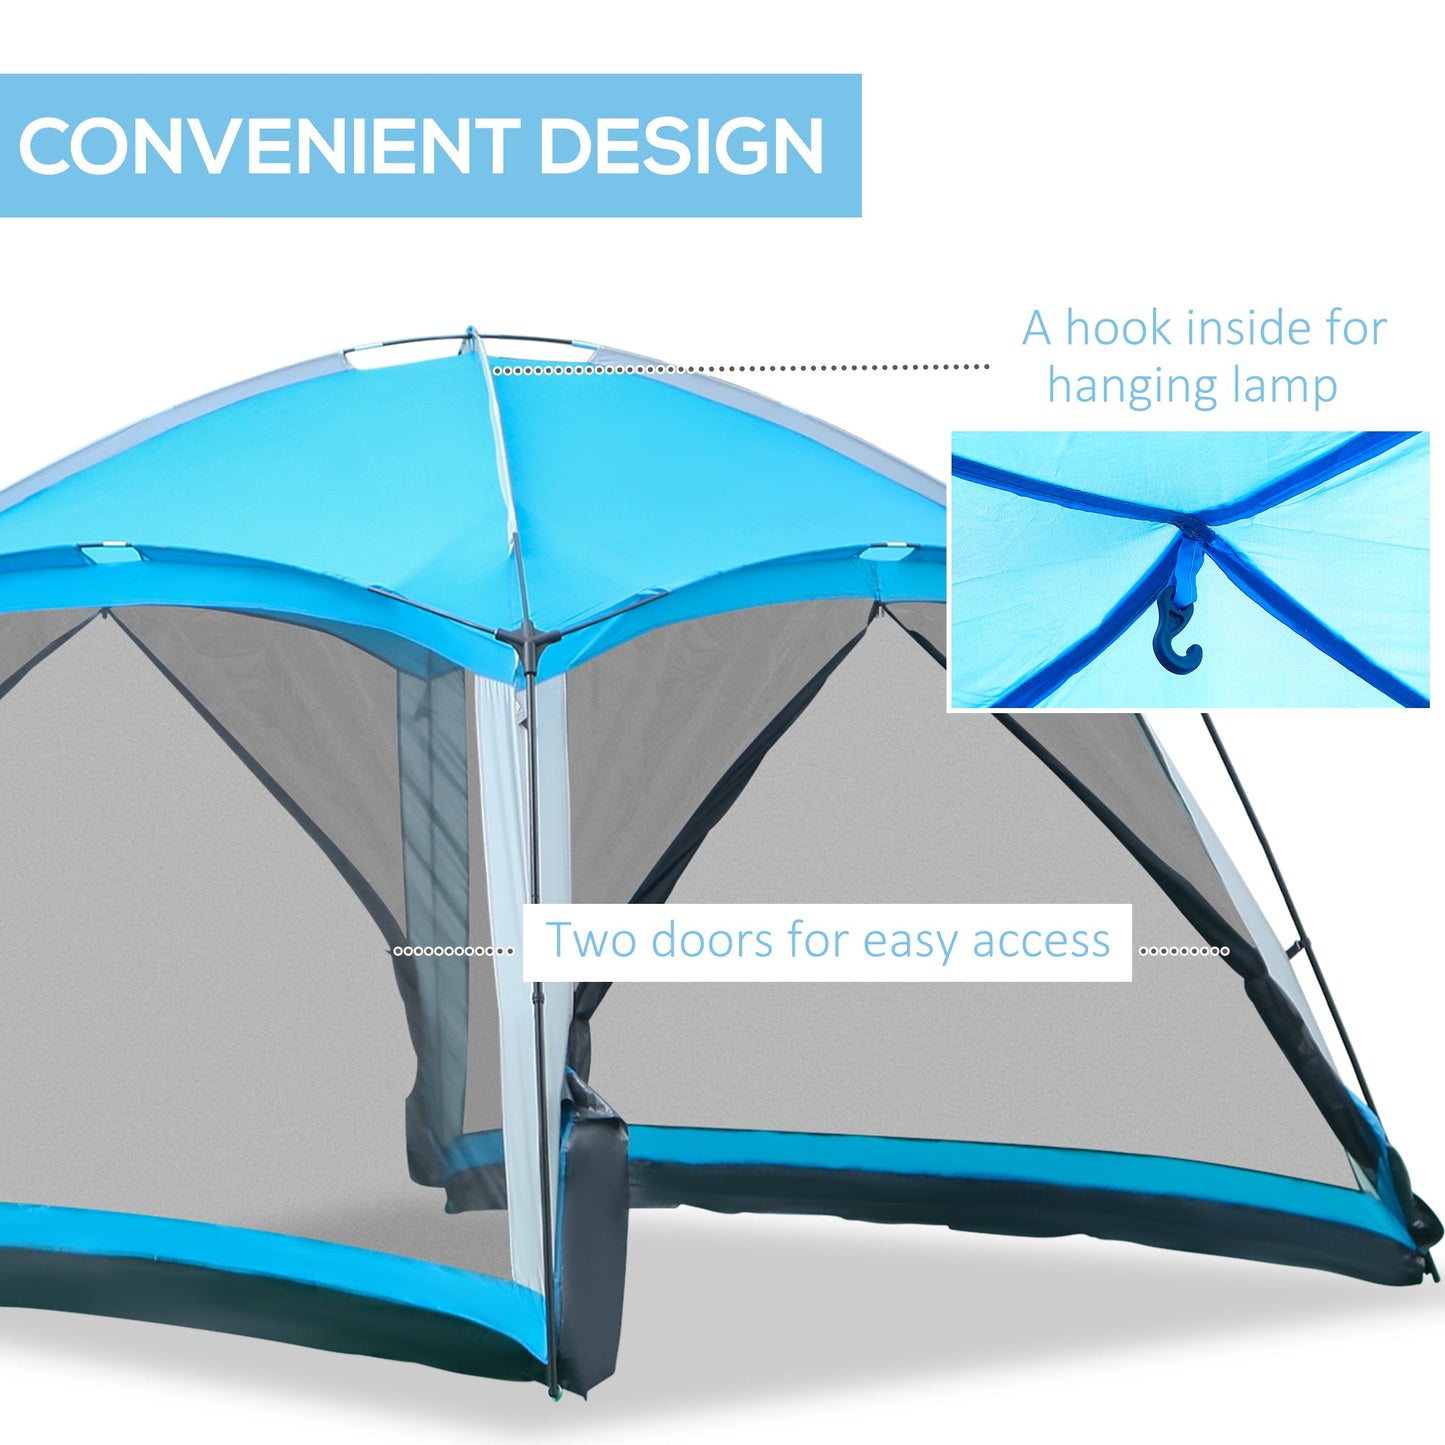 Miscellaneous-12' x 12' Screen Tent, 8 Person Camping Tent with Carry Bag and 4 Mesh Walls for Hiking, Backpacking - Sky Blue - Outdoor Style Company